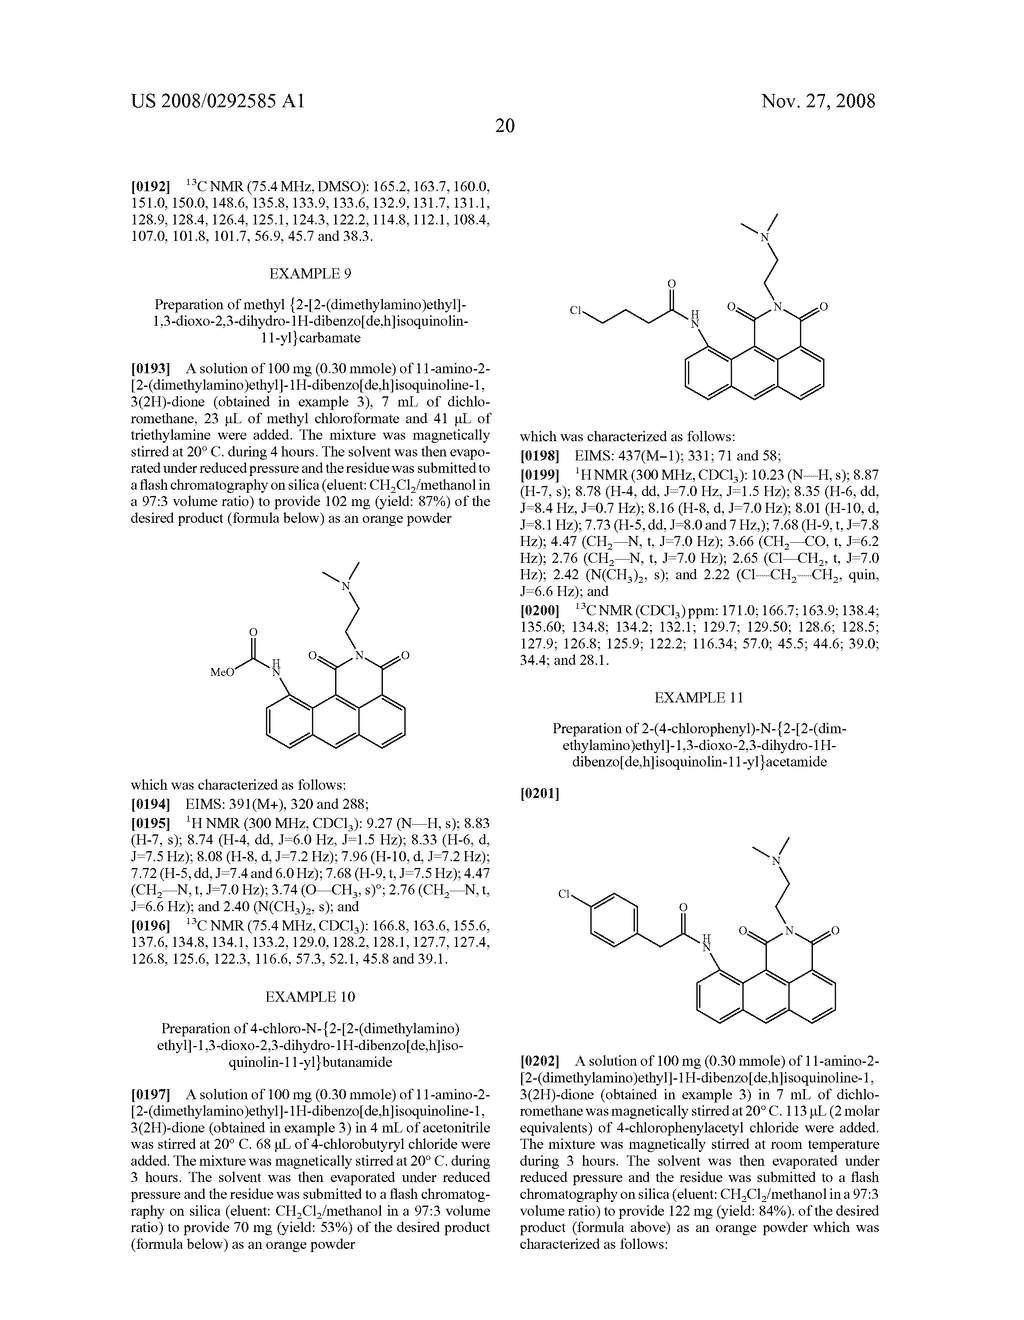 Azonafide Derivatives, Methods for Their Production and Pharmaceutical Compositions Therefrom - diagram, schematic, and image 21